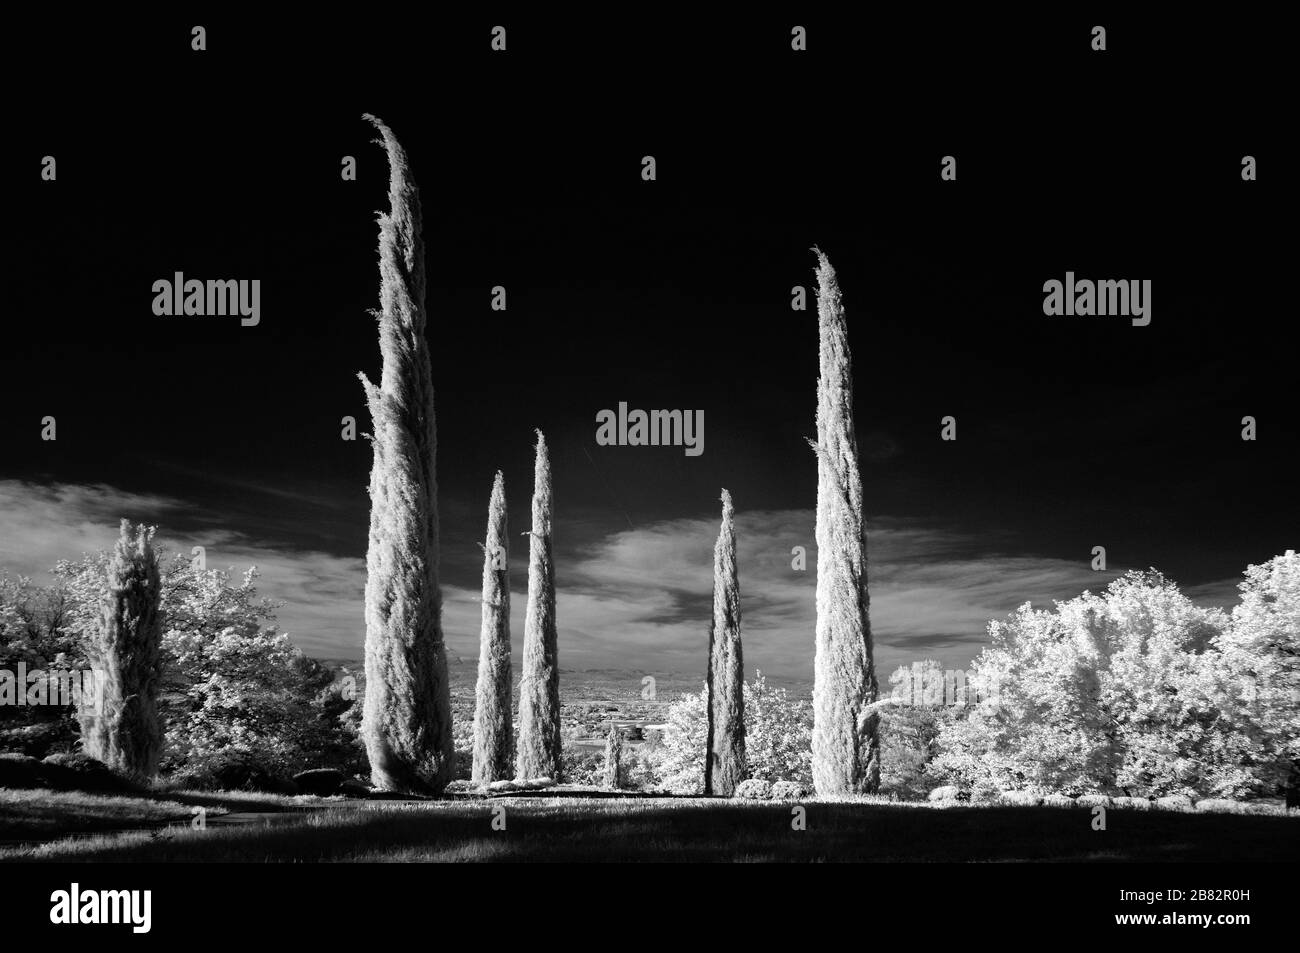 Infrared, Black & White or Monochrome Line or Rows of Mediterranean Cypress Treesor Cypresses, Cupressus sempervirens, Provence France Stock Photo